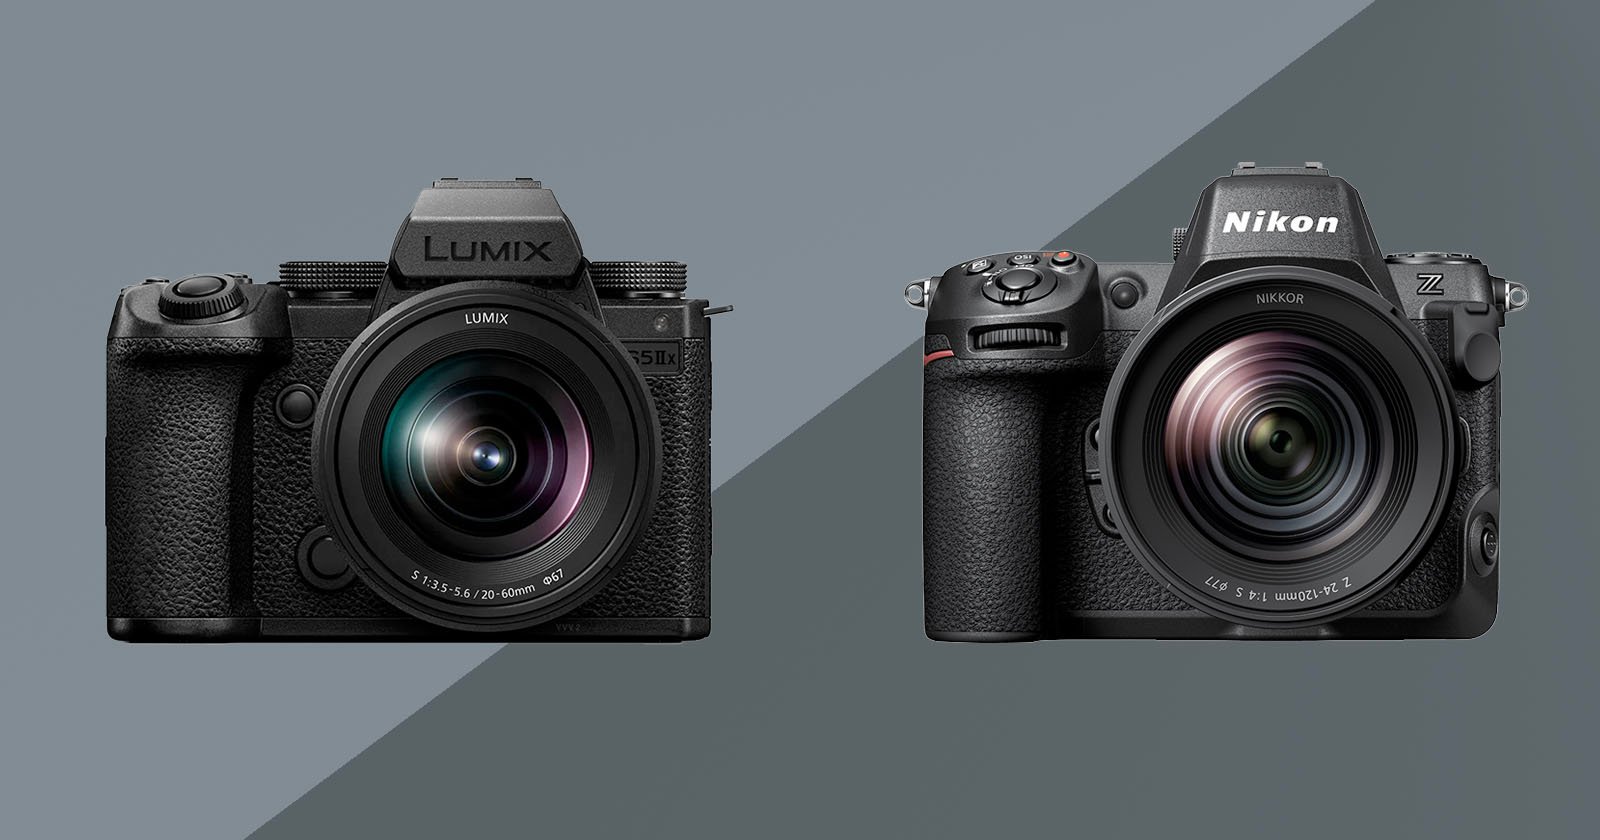 A Panasonic S5 IIX (left) and a Nikon Z8 (right) are next to each other on a two-toned background.